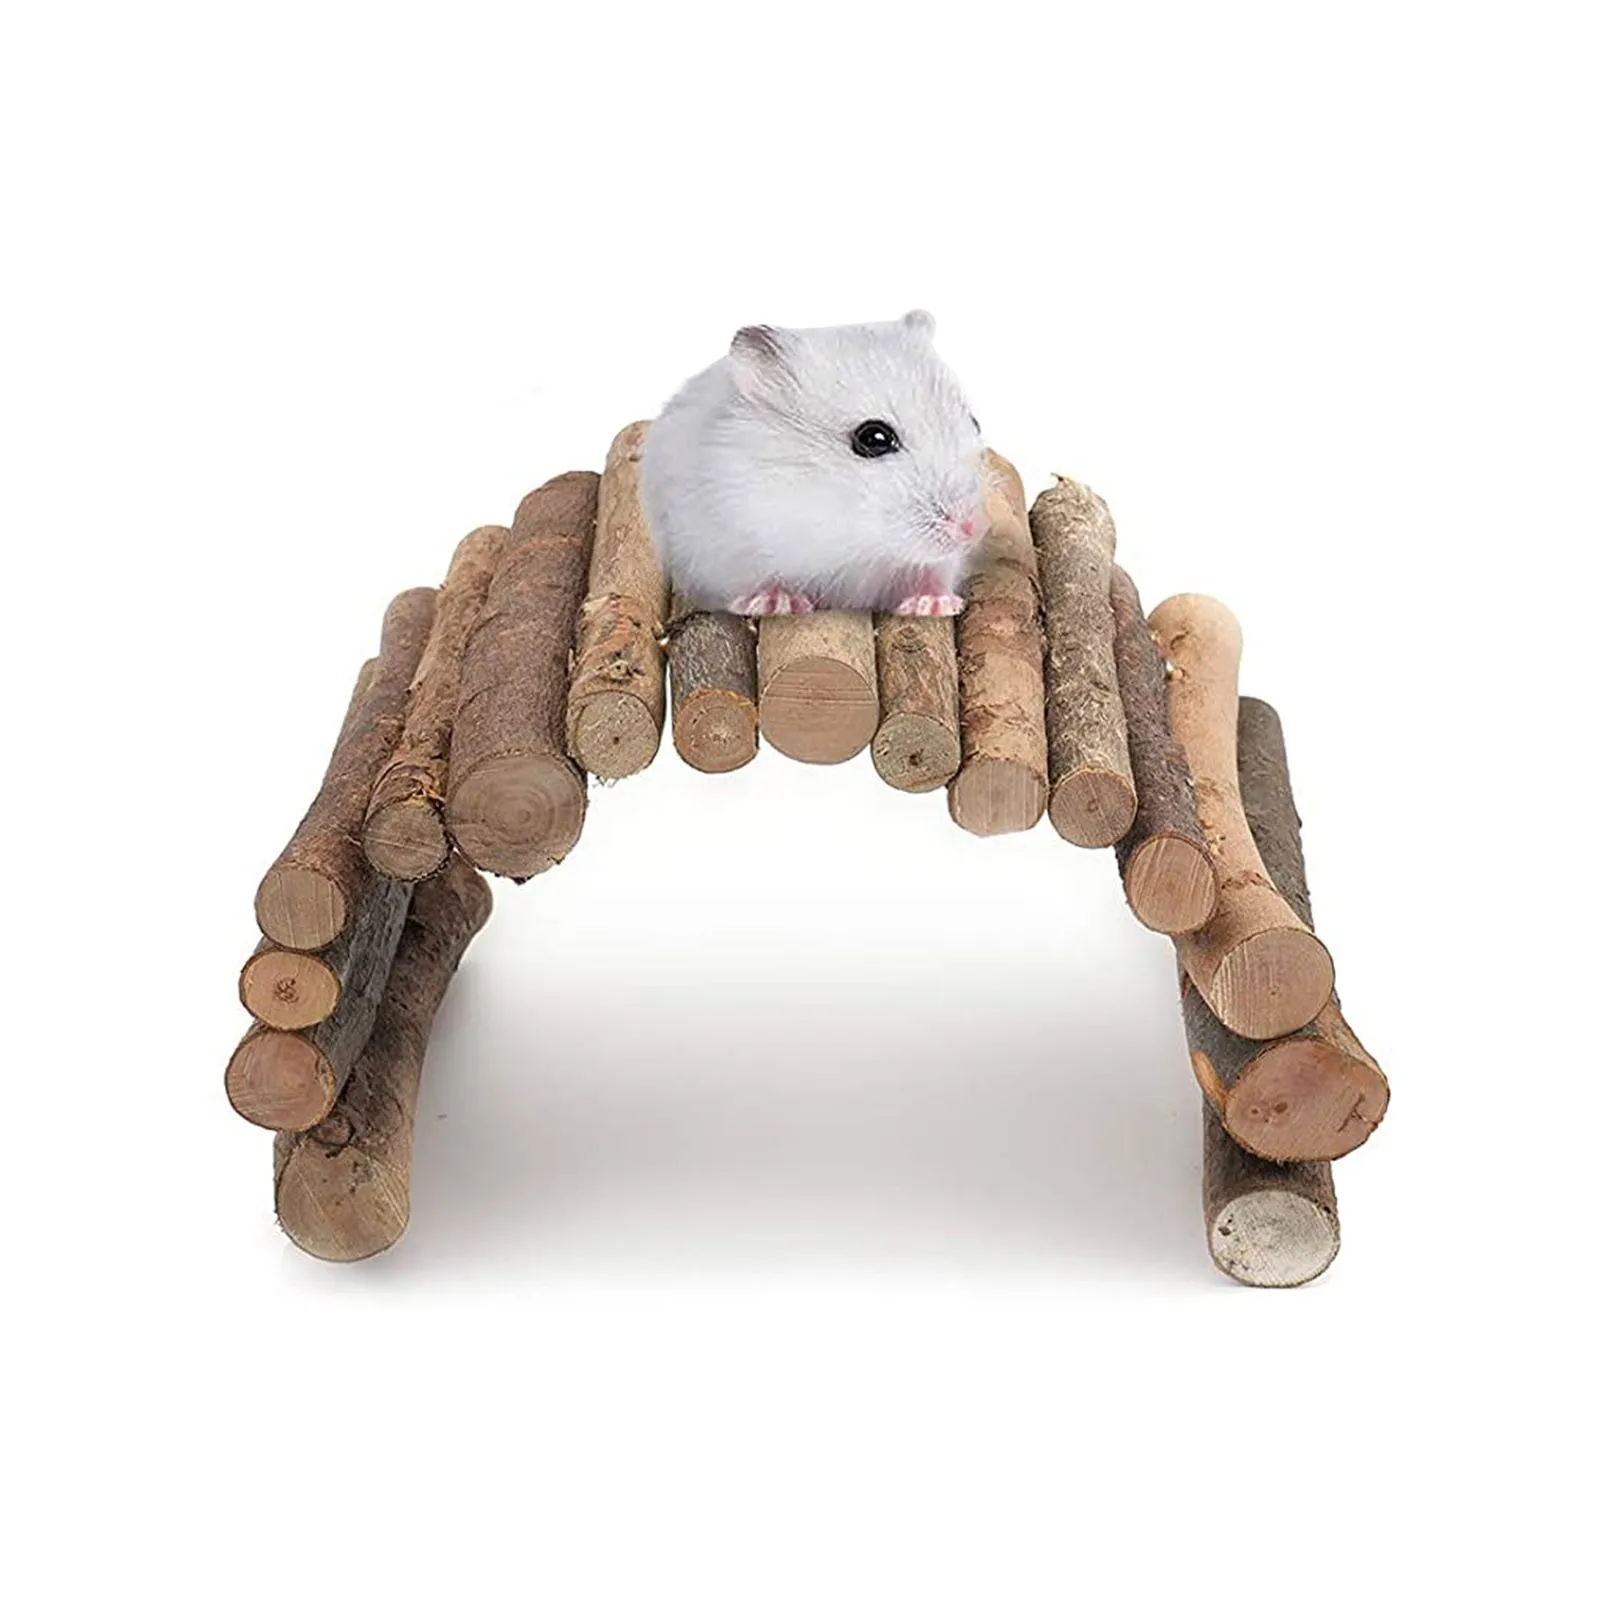 Small Pet Supplies Hamster Climbing Ladder Toy Wooden Mouse Rat Bridge Exercise 